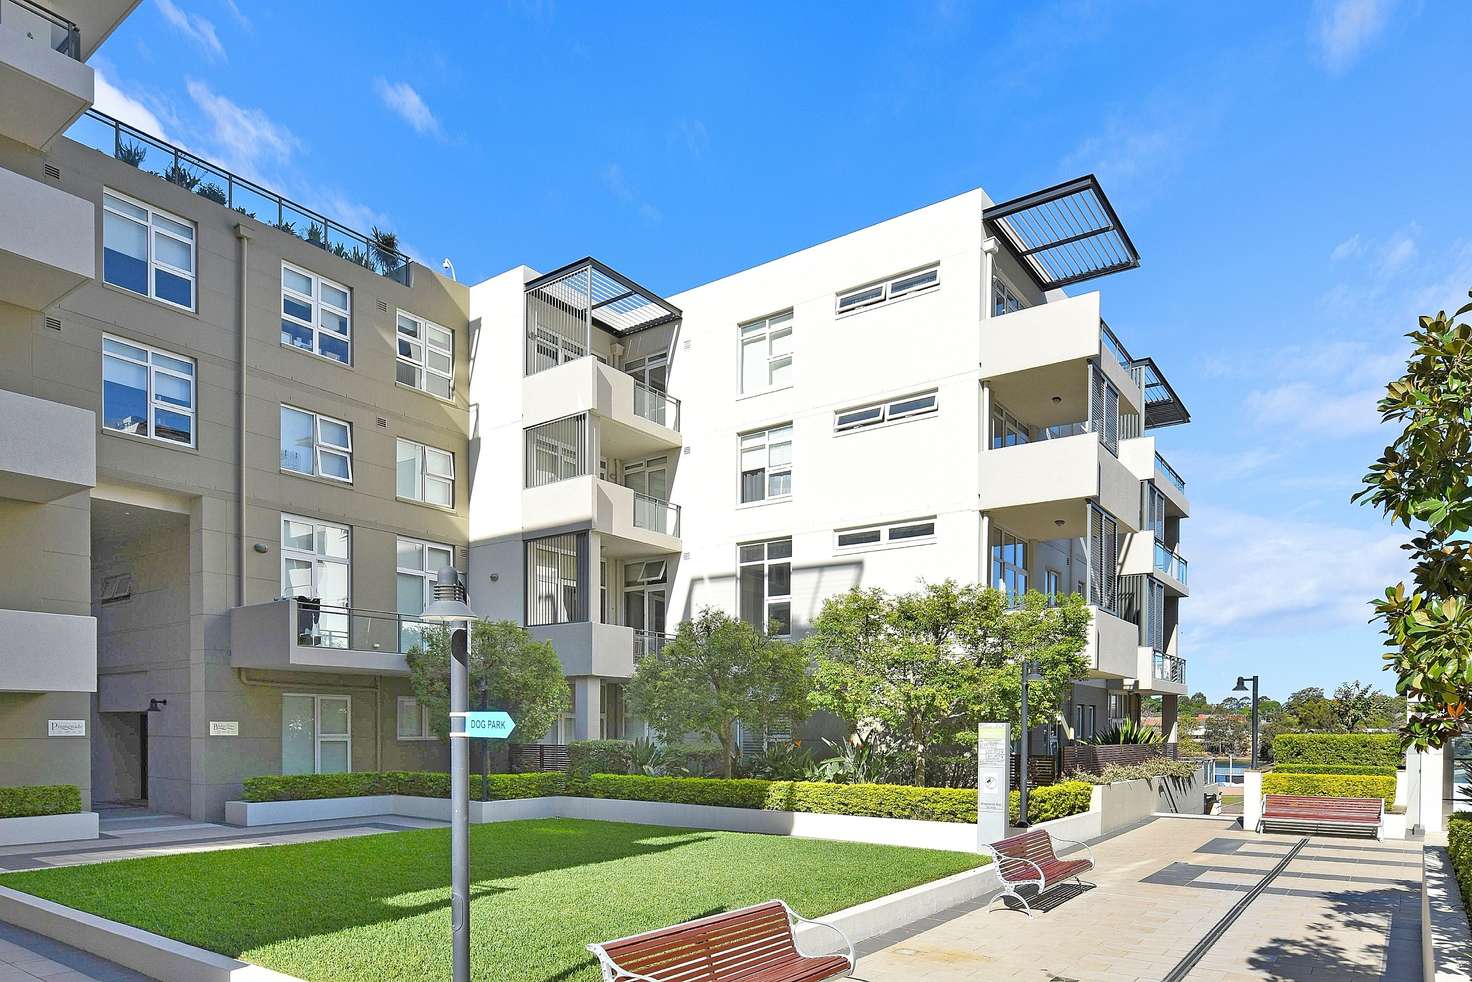 Main view of Homely apartment listing, 6/1 Bay Dr., Meadowbank NSW 2114